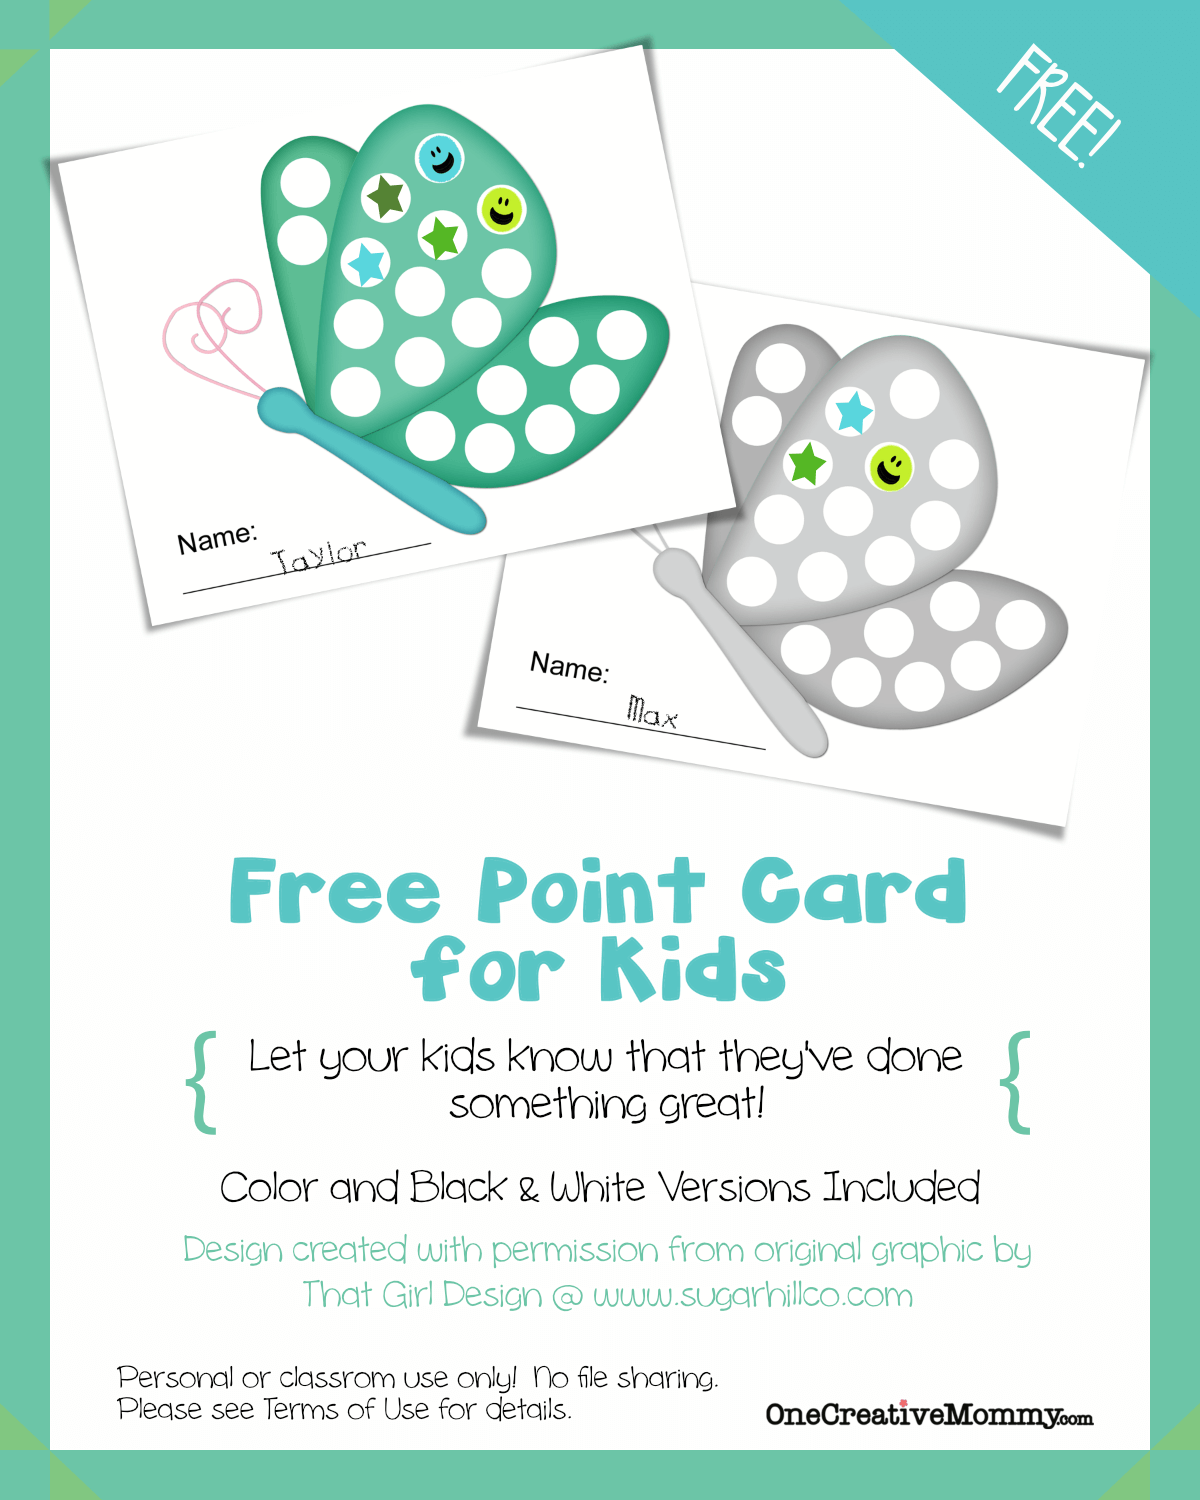 Free Point Card for Kids from OneCreativeMommy {Let your kids know when they've done something good!}  Stop by every month for a new design.